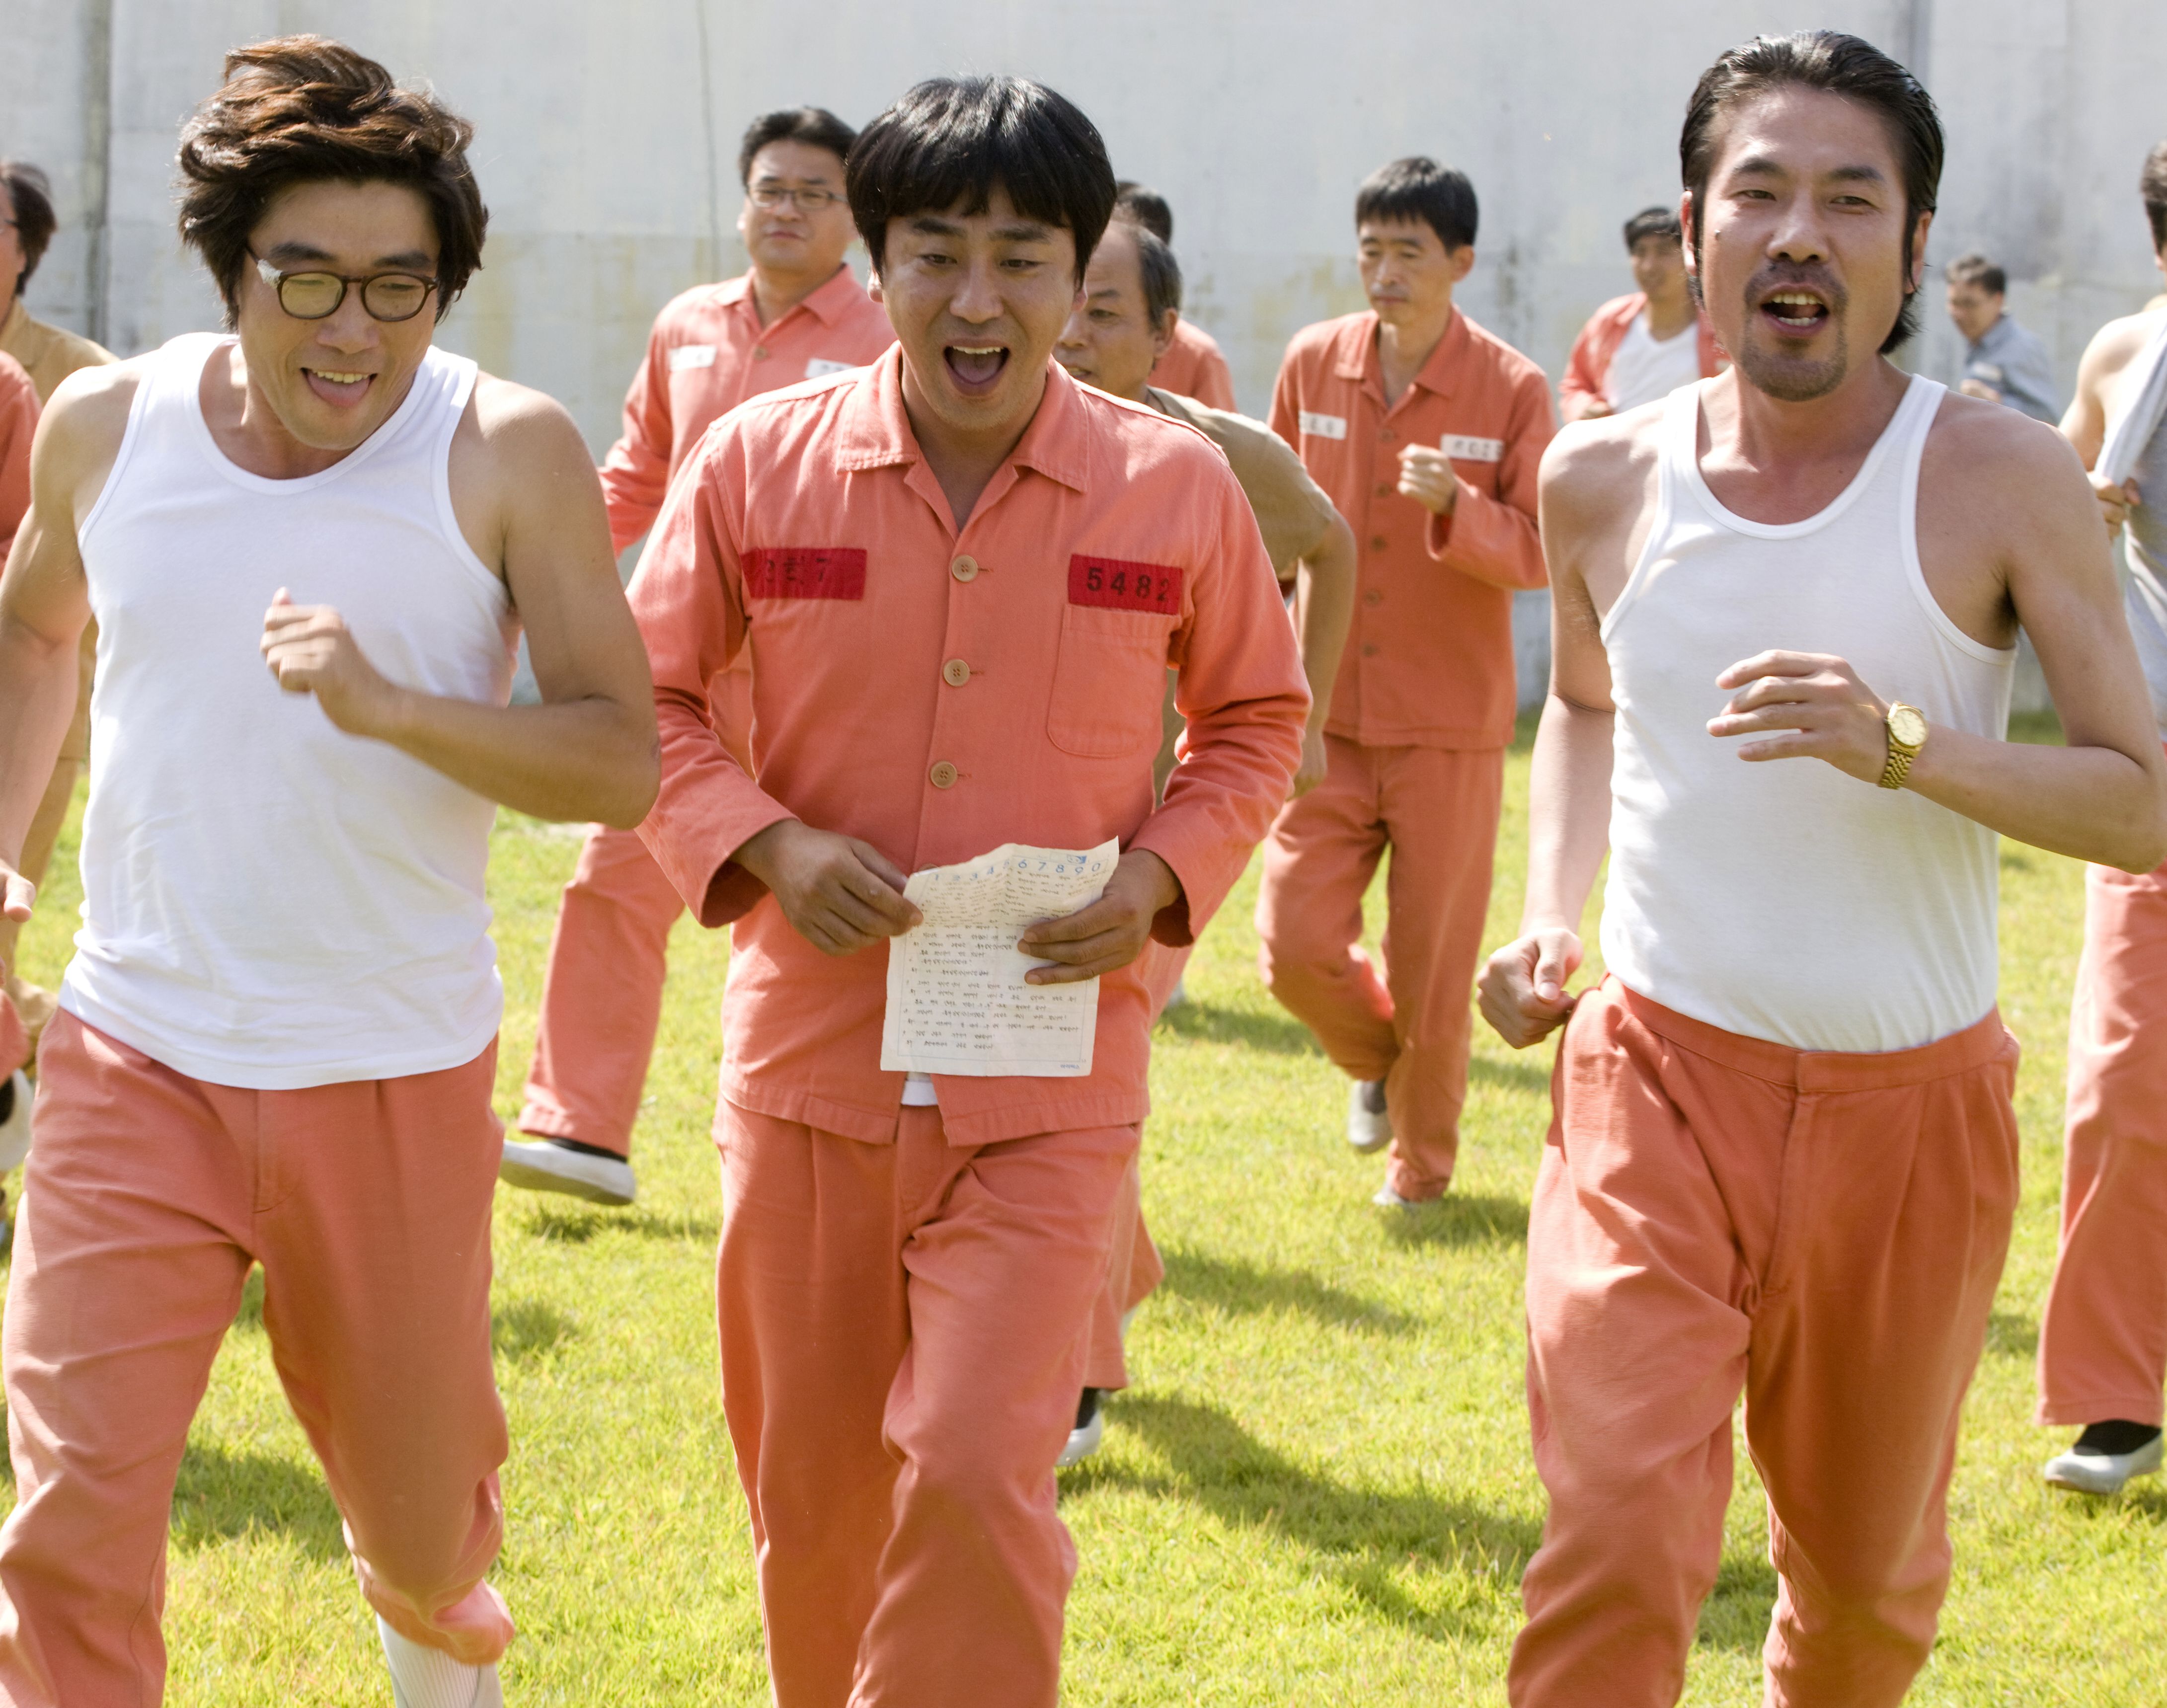 Miracle in Cell No.7 (2013)